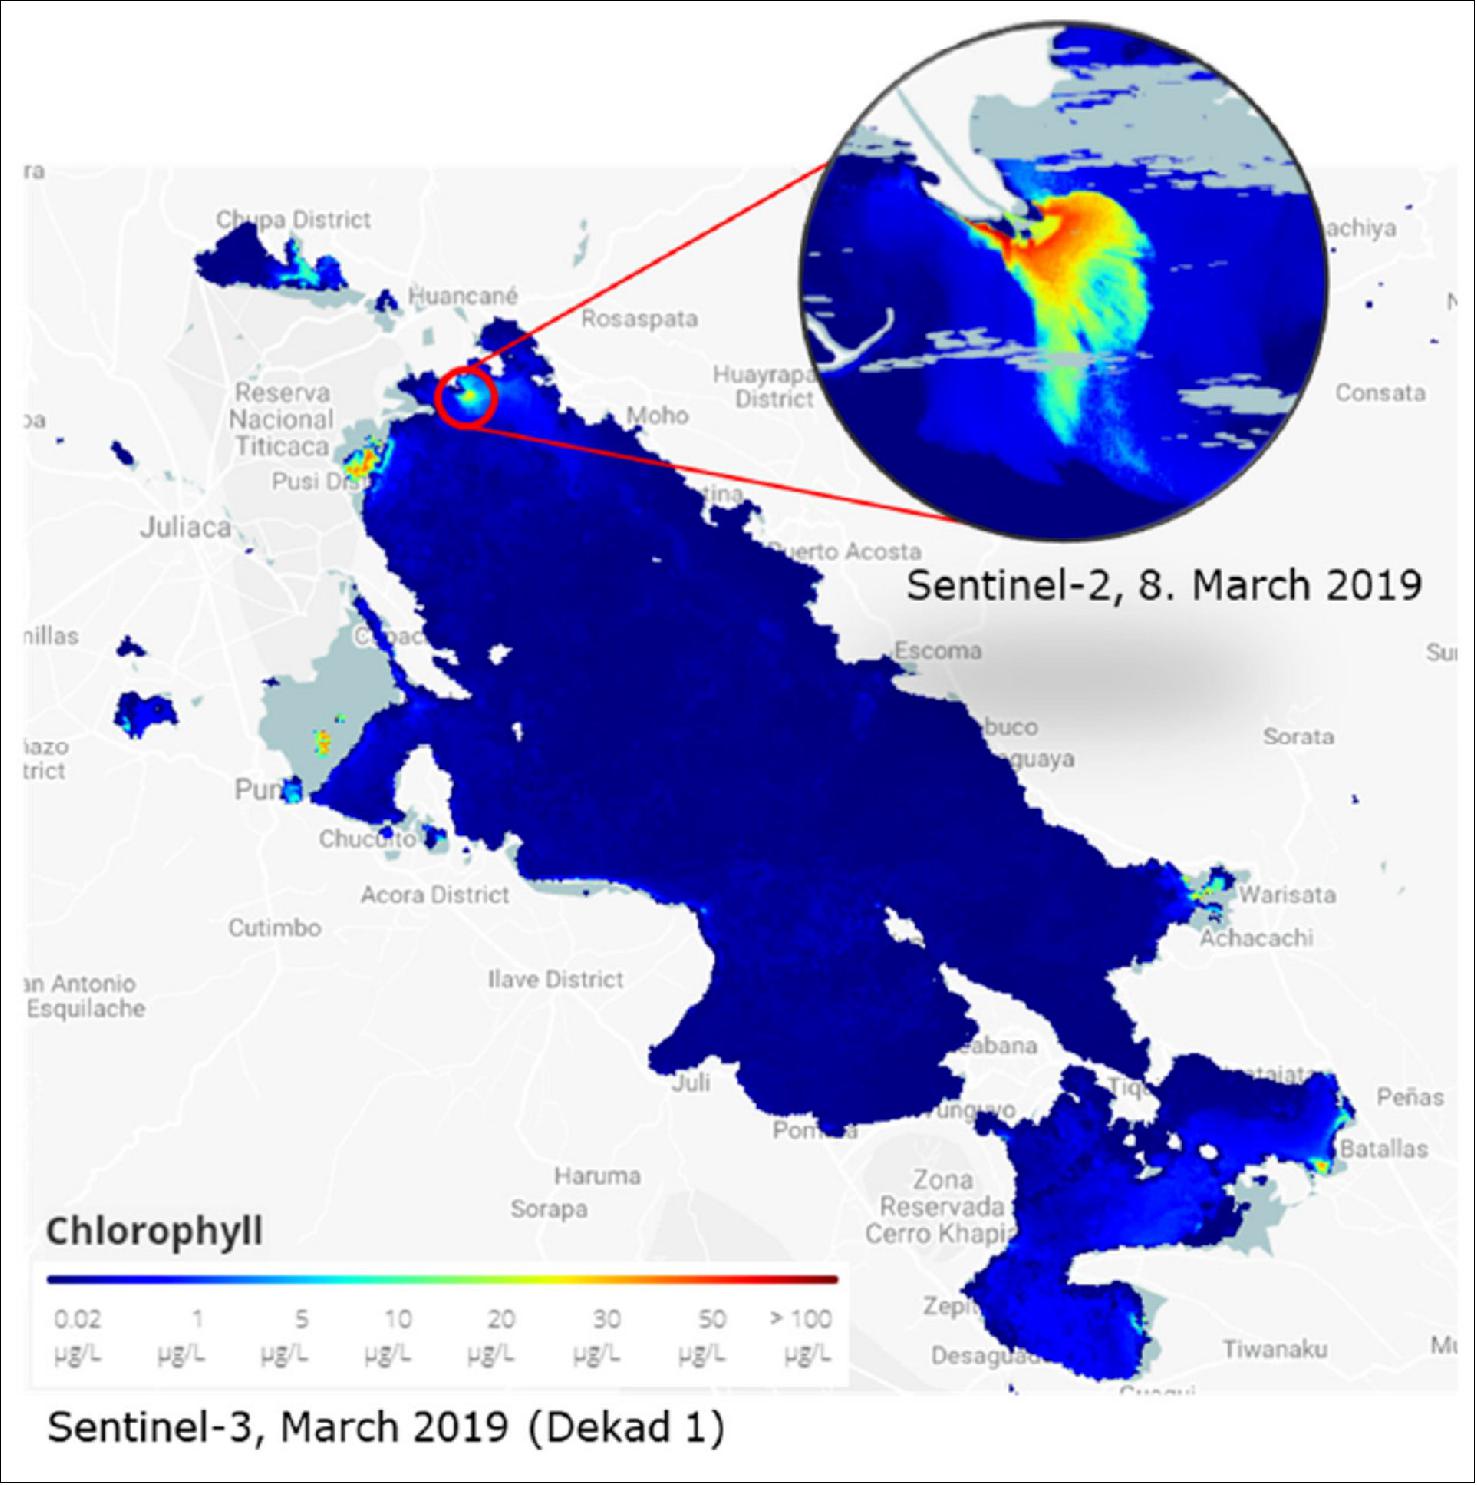 Figure 4: This map shows the chlorophyll content of Lake Titicaca based on Copernicus Sentinel-3 data. Such 10-day composites can show spatial variation of concentrations in the lake and help detect trends and hot spots while minimizing the impact of clouds. The insert image shows a daily chlorophyll map from 8 March 2019 for a selected hotspot region using Sentinel-2 imagery in 10 m resolution (image credit: EO4SD Water)